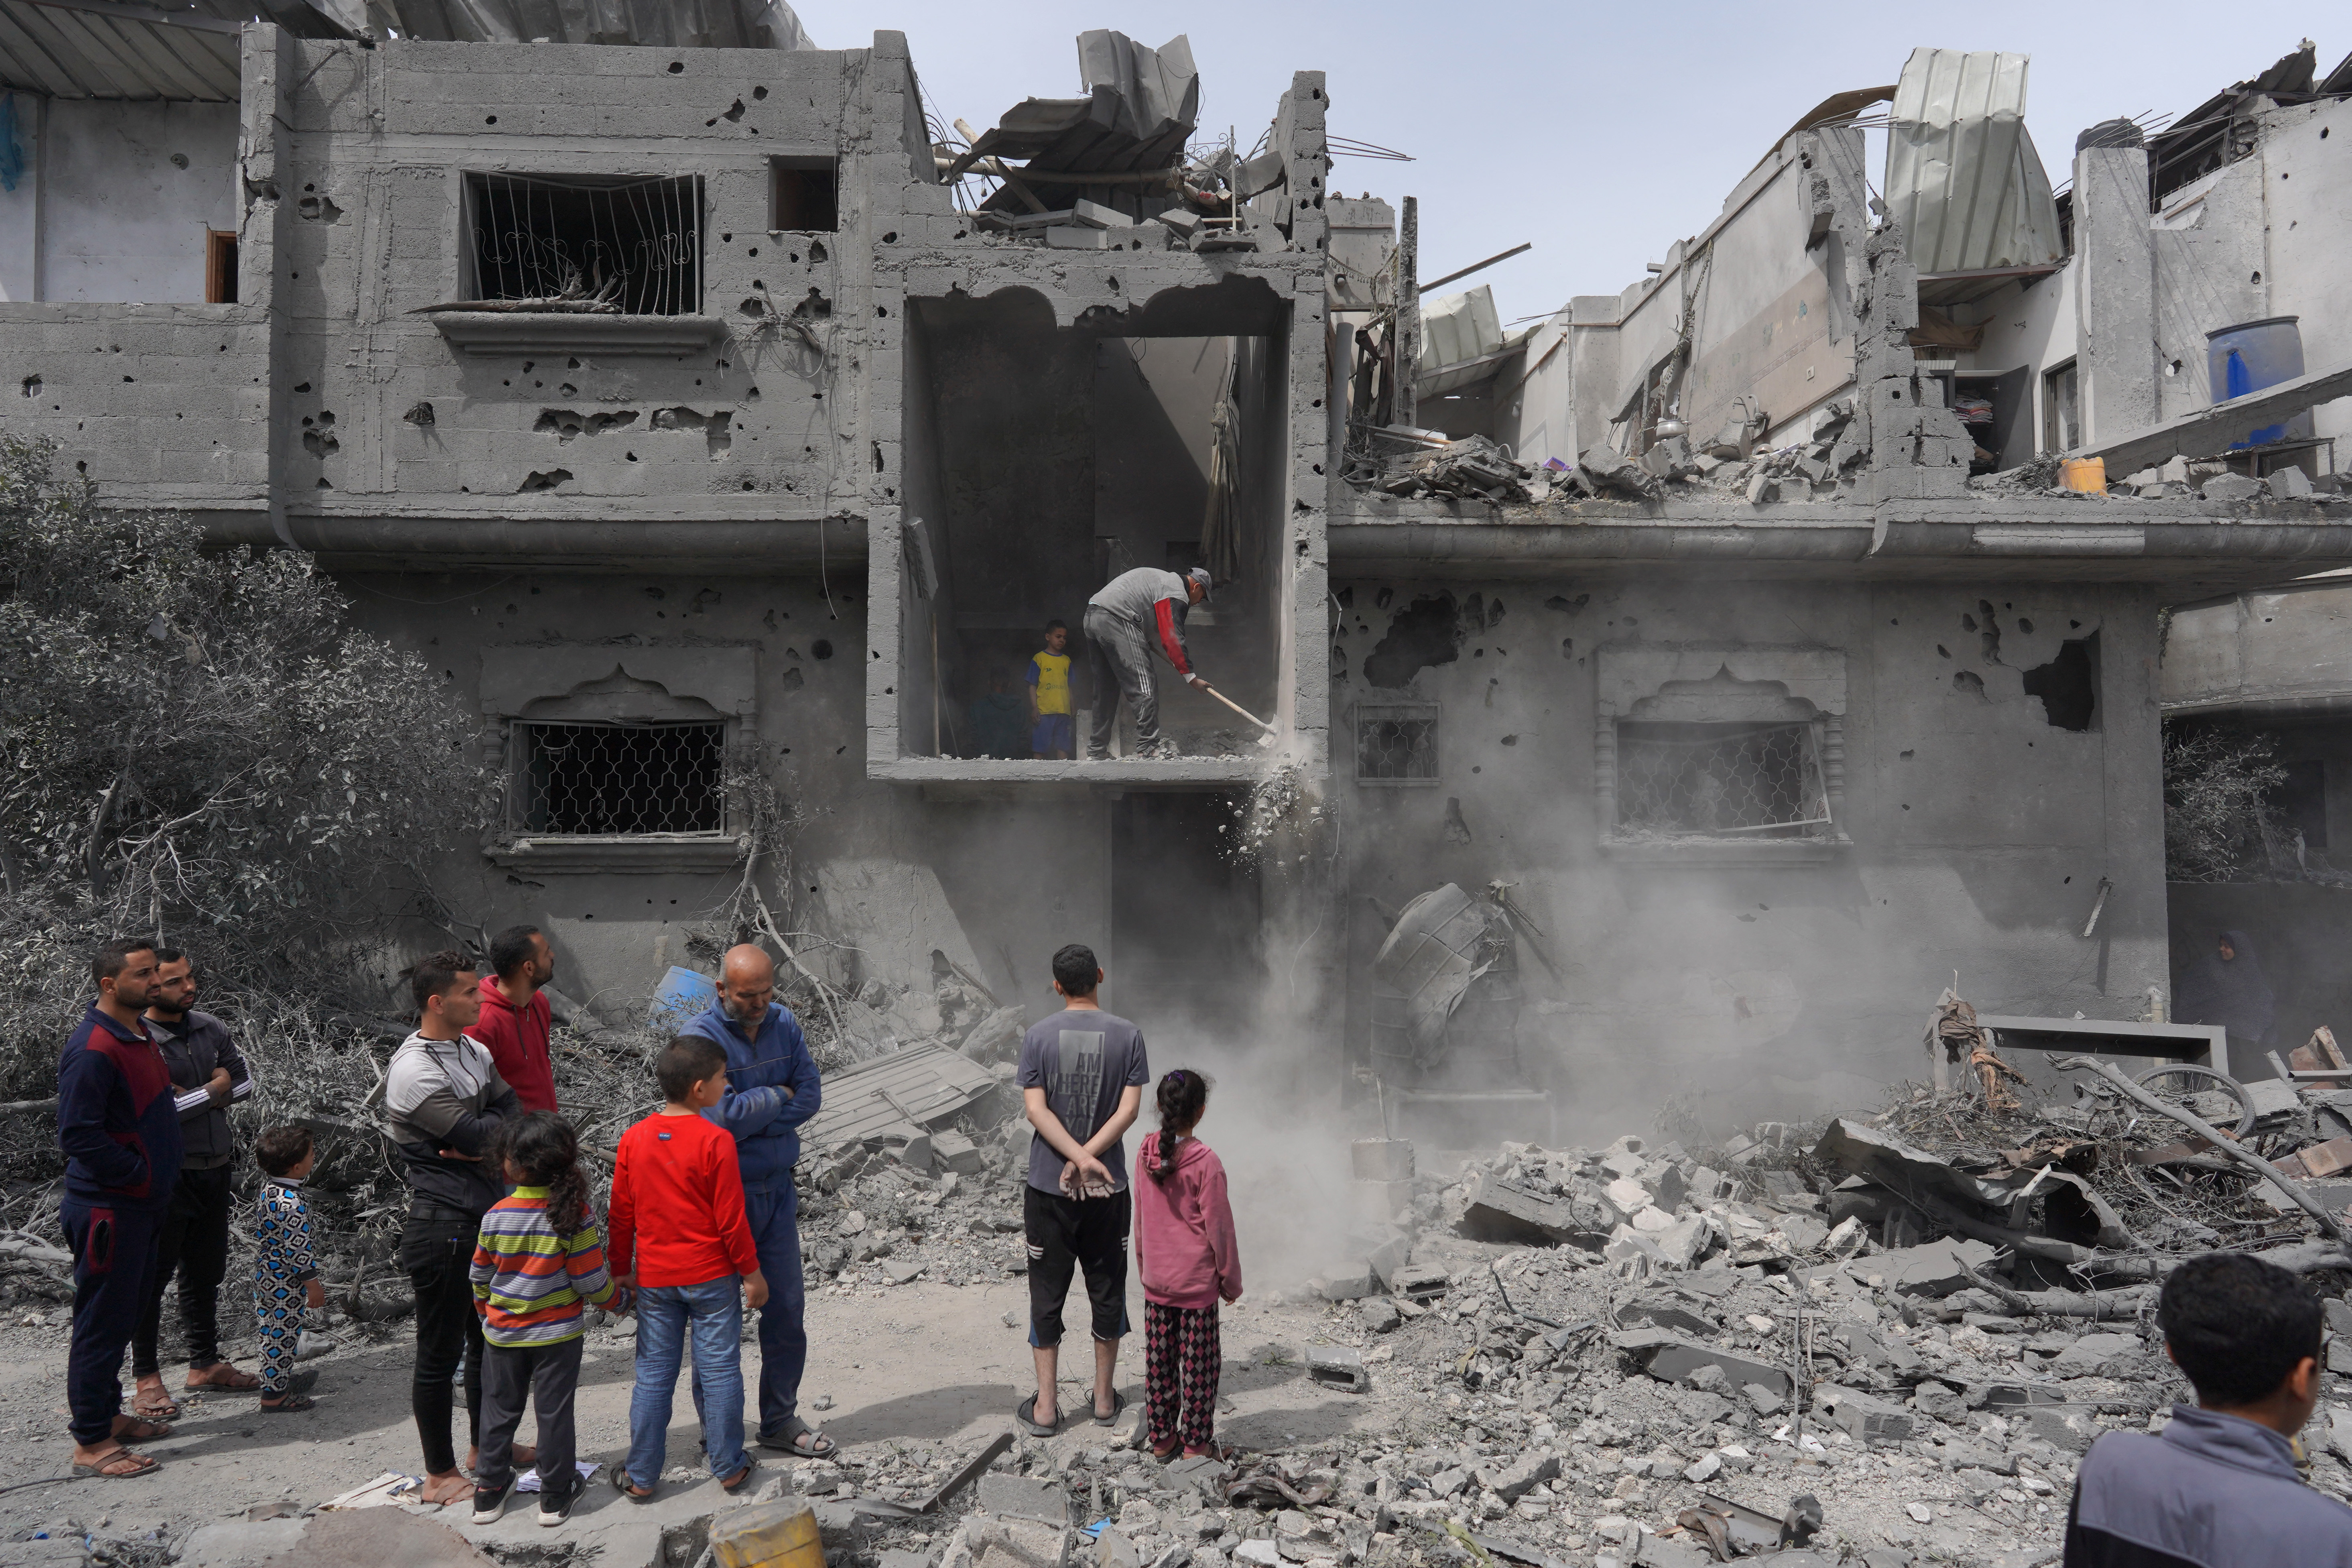 Palestinians clear debris from a building, following Israeli bombardment